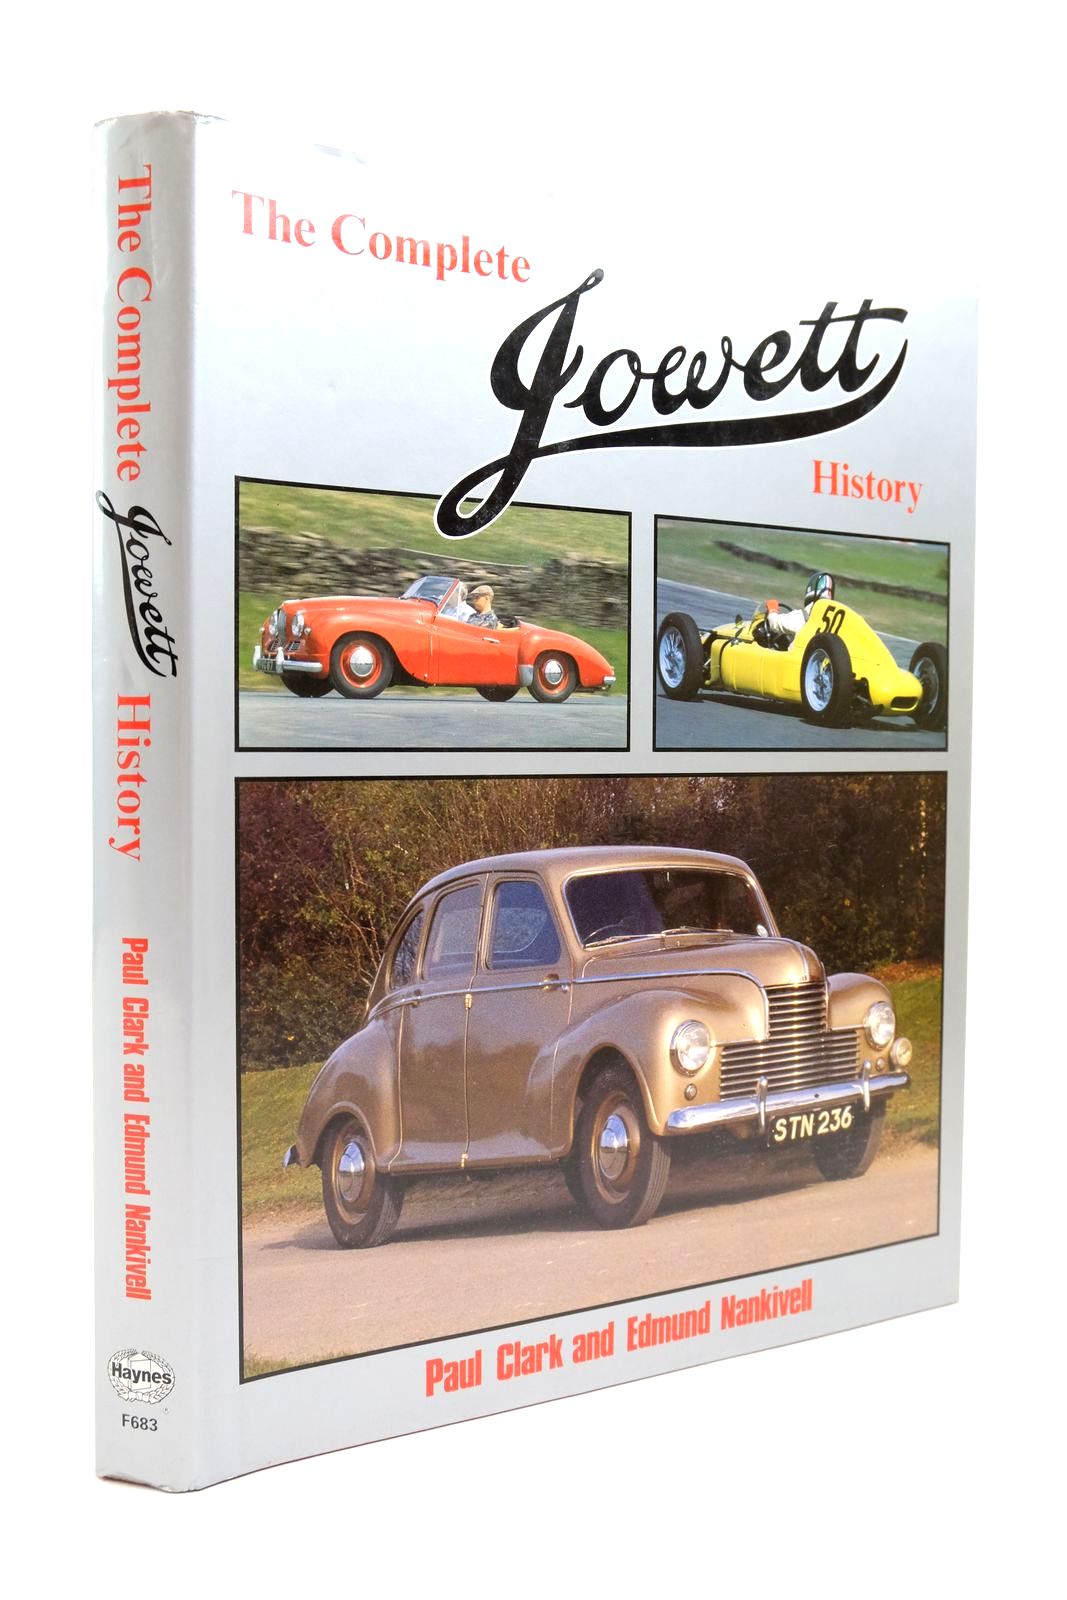 Photo of THE COMPLETE JOWETT HISTORY written by Clark, Paul Nankivell, Edmund published by Foulis, Haynes (STOCK CODE: 2139301)  for sale by Stella & Rose's Books